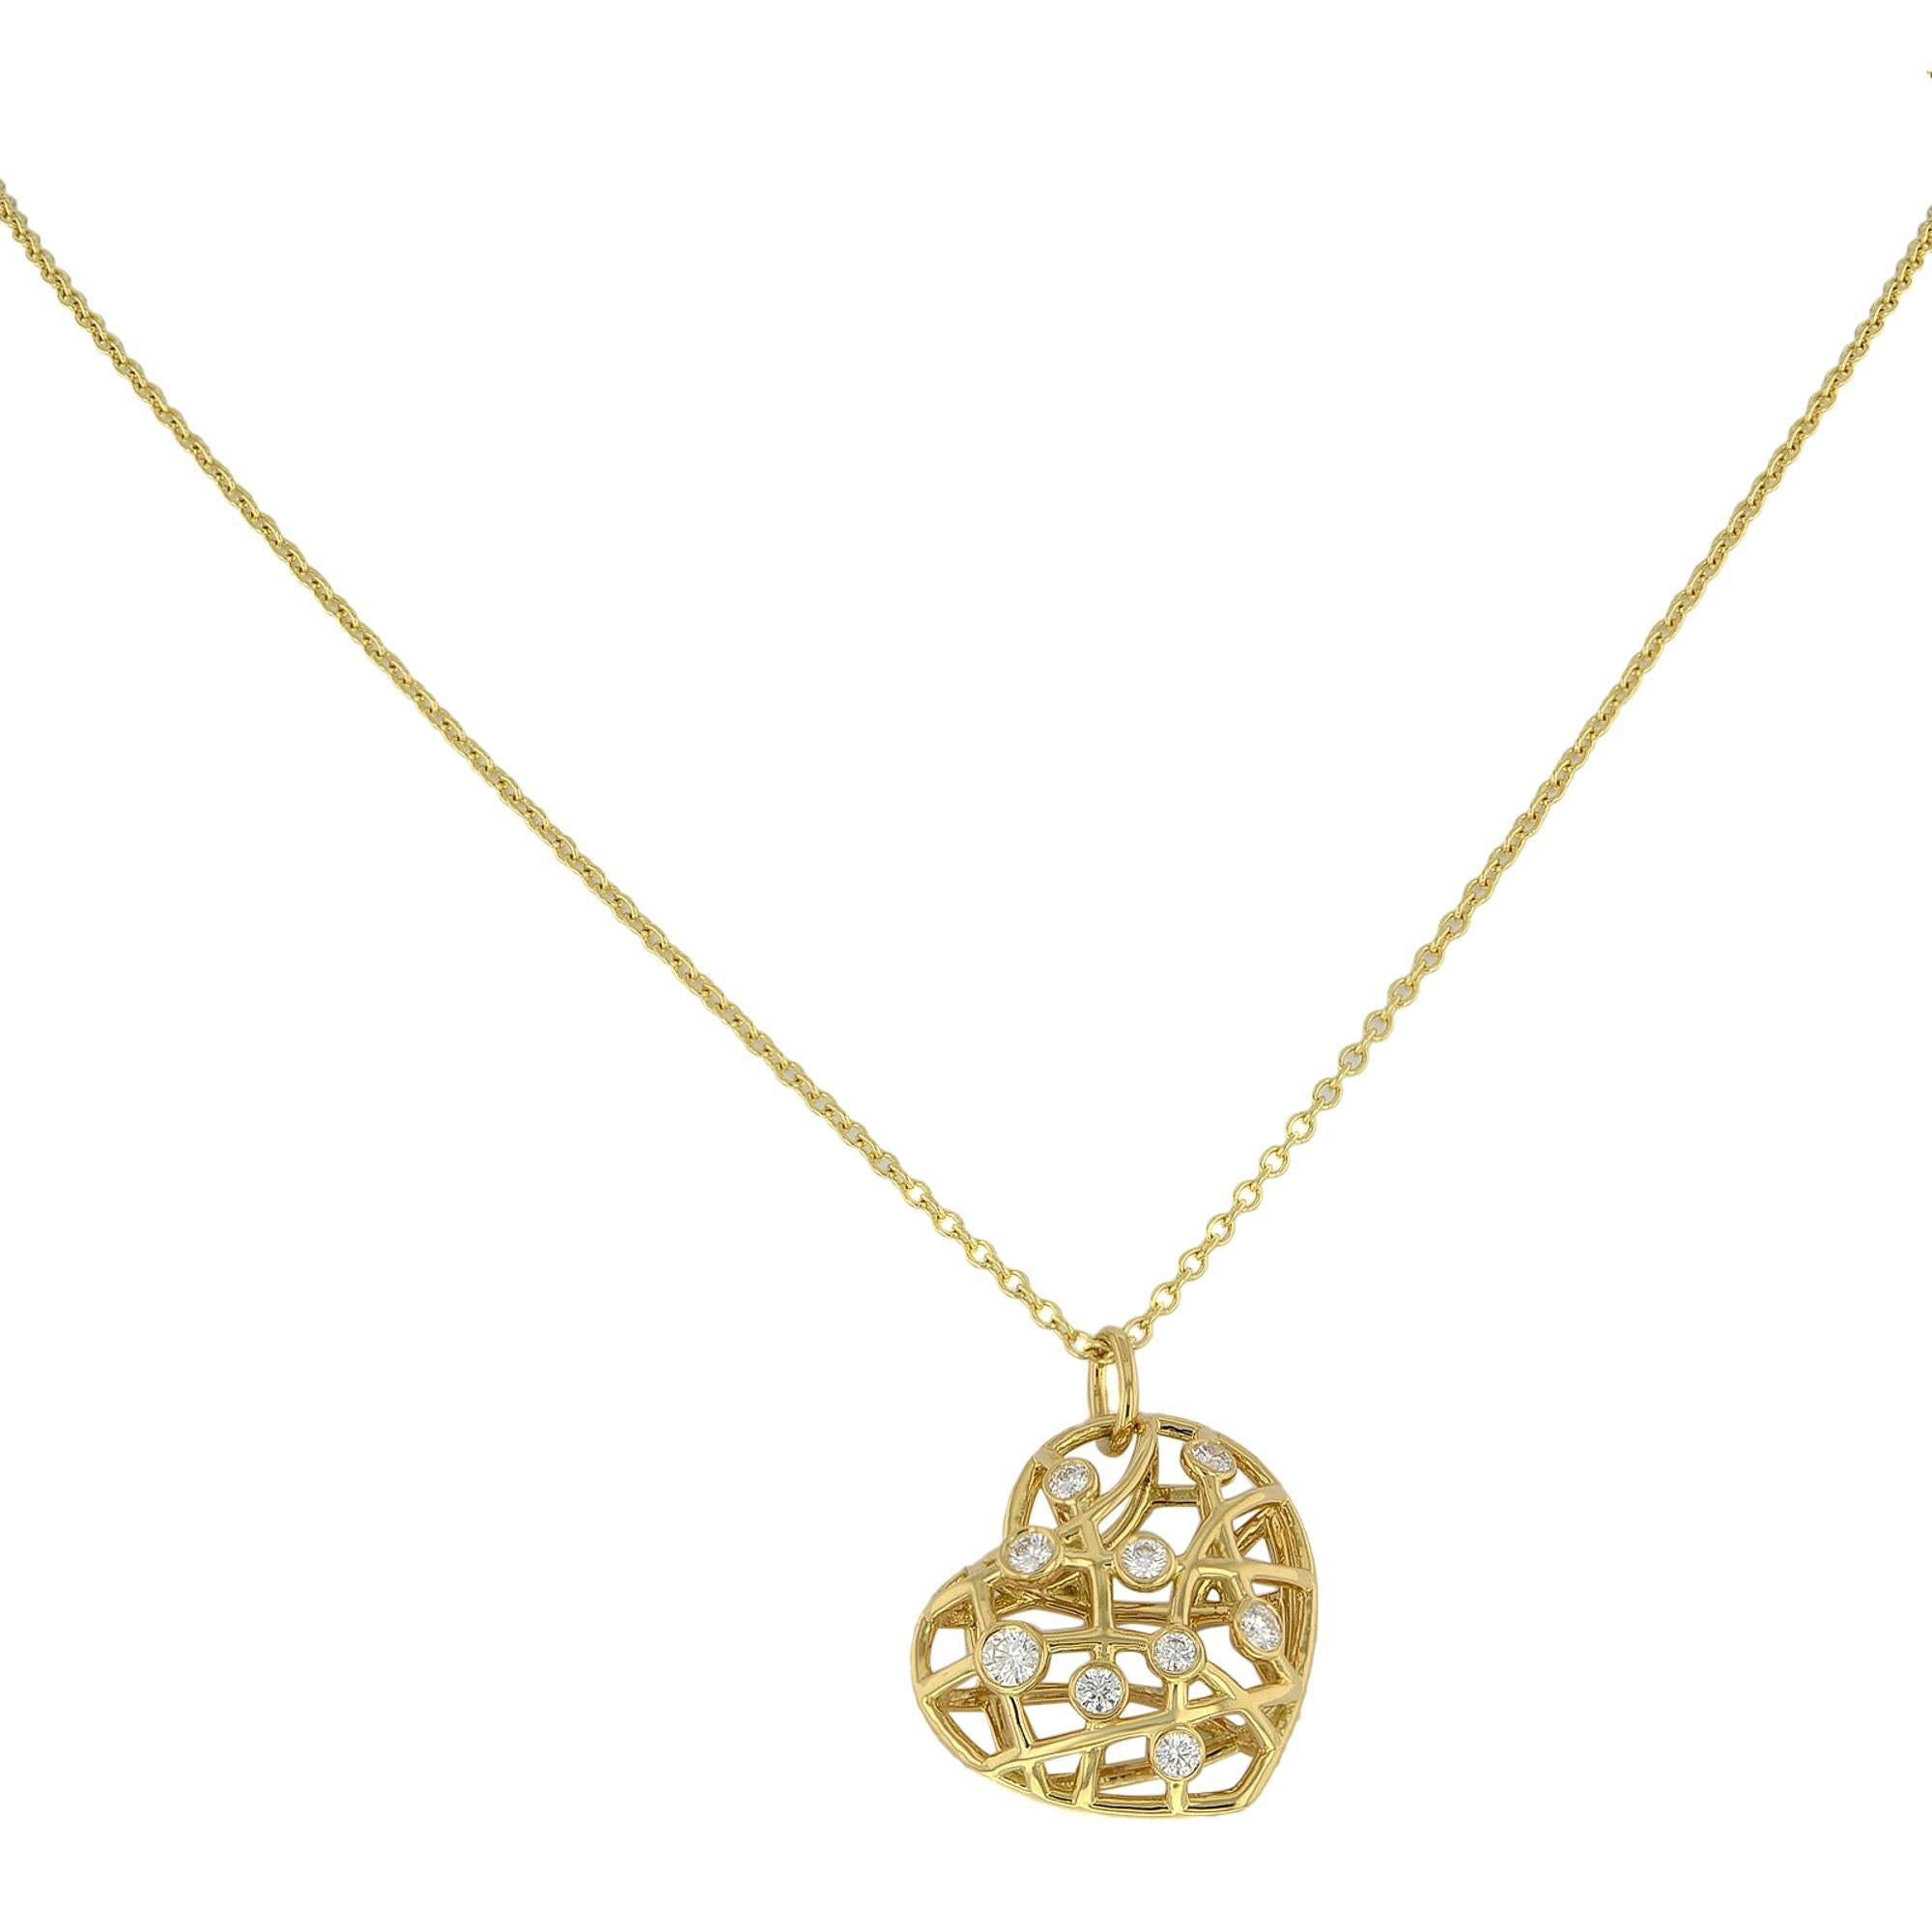 Hearts on Fire Diamond Chain Pendant Necklace 18K Yellow Gold 0.35Cttw For Sale